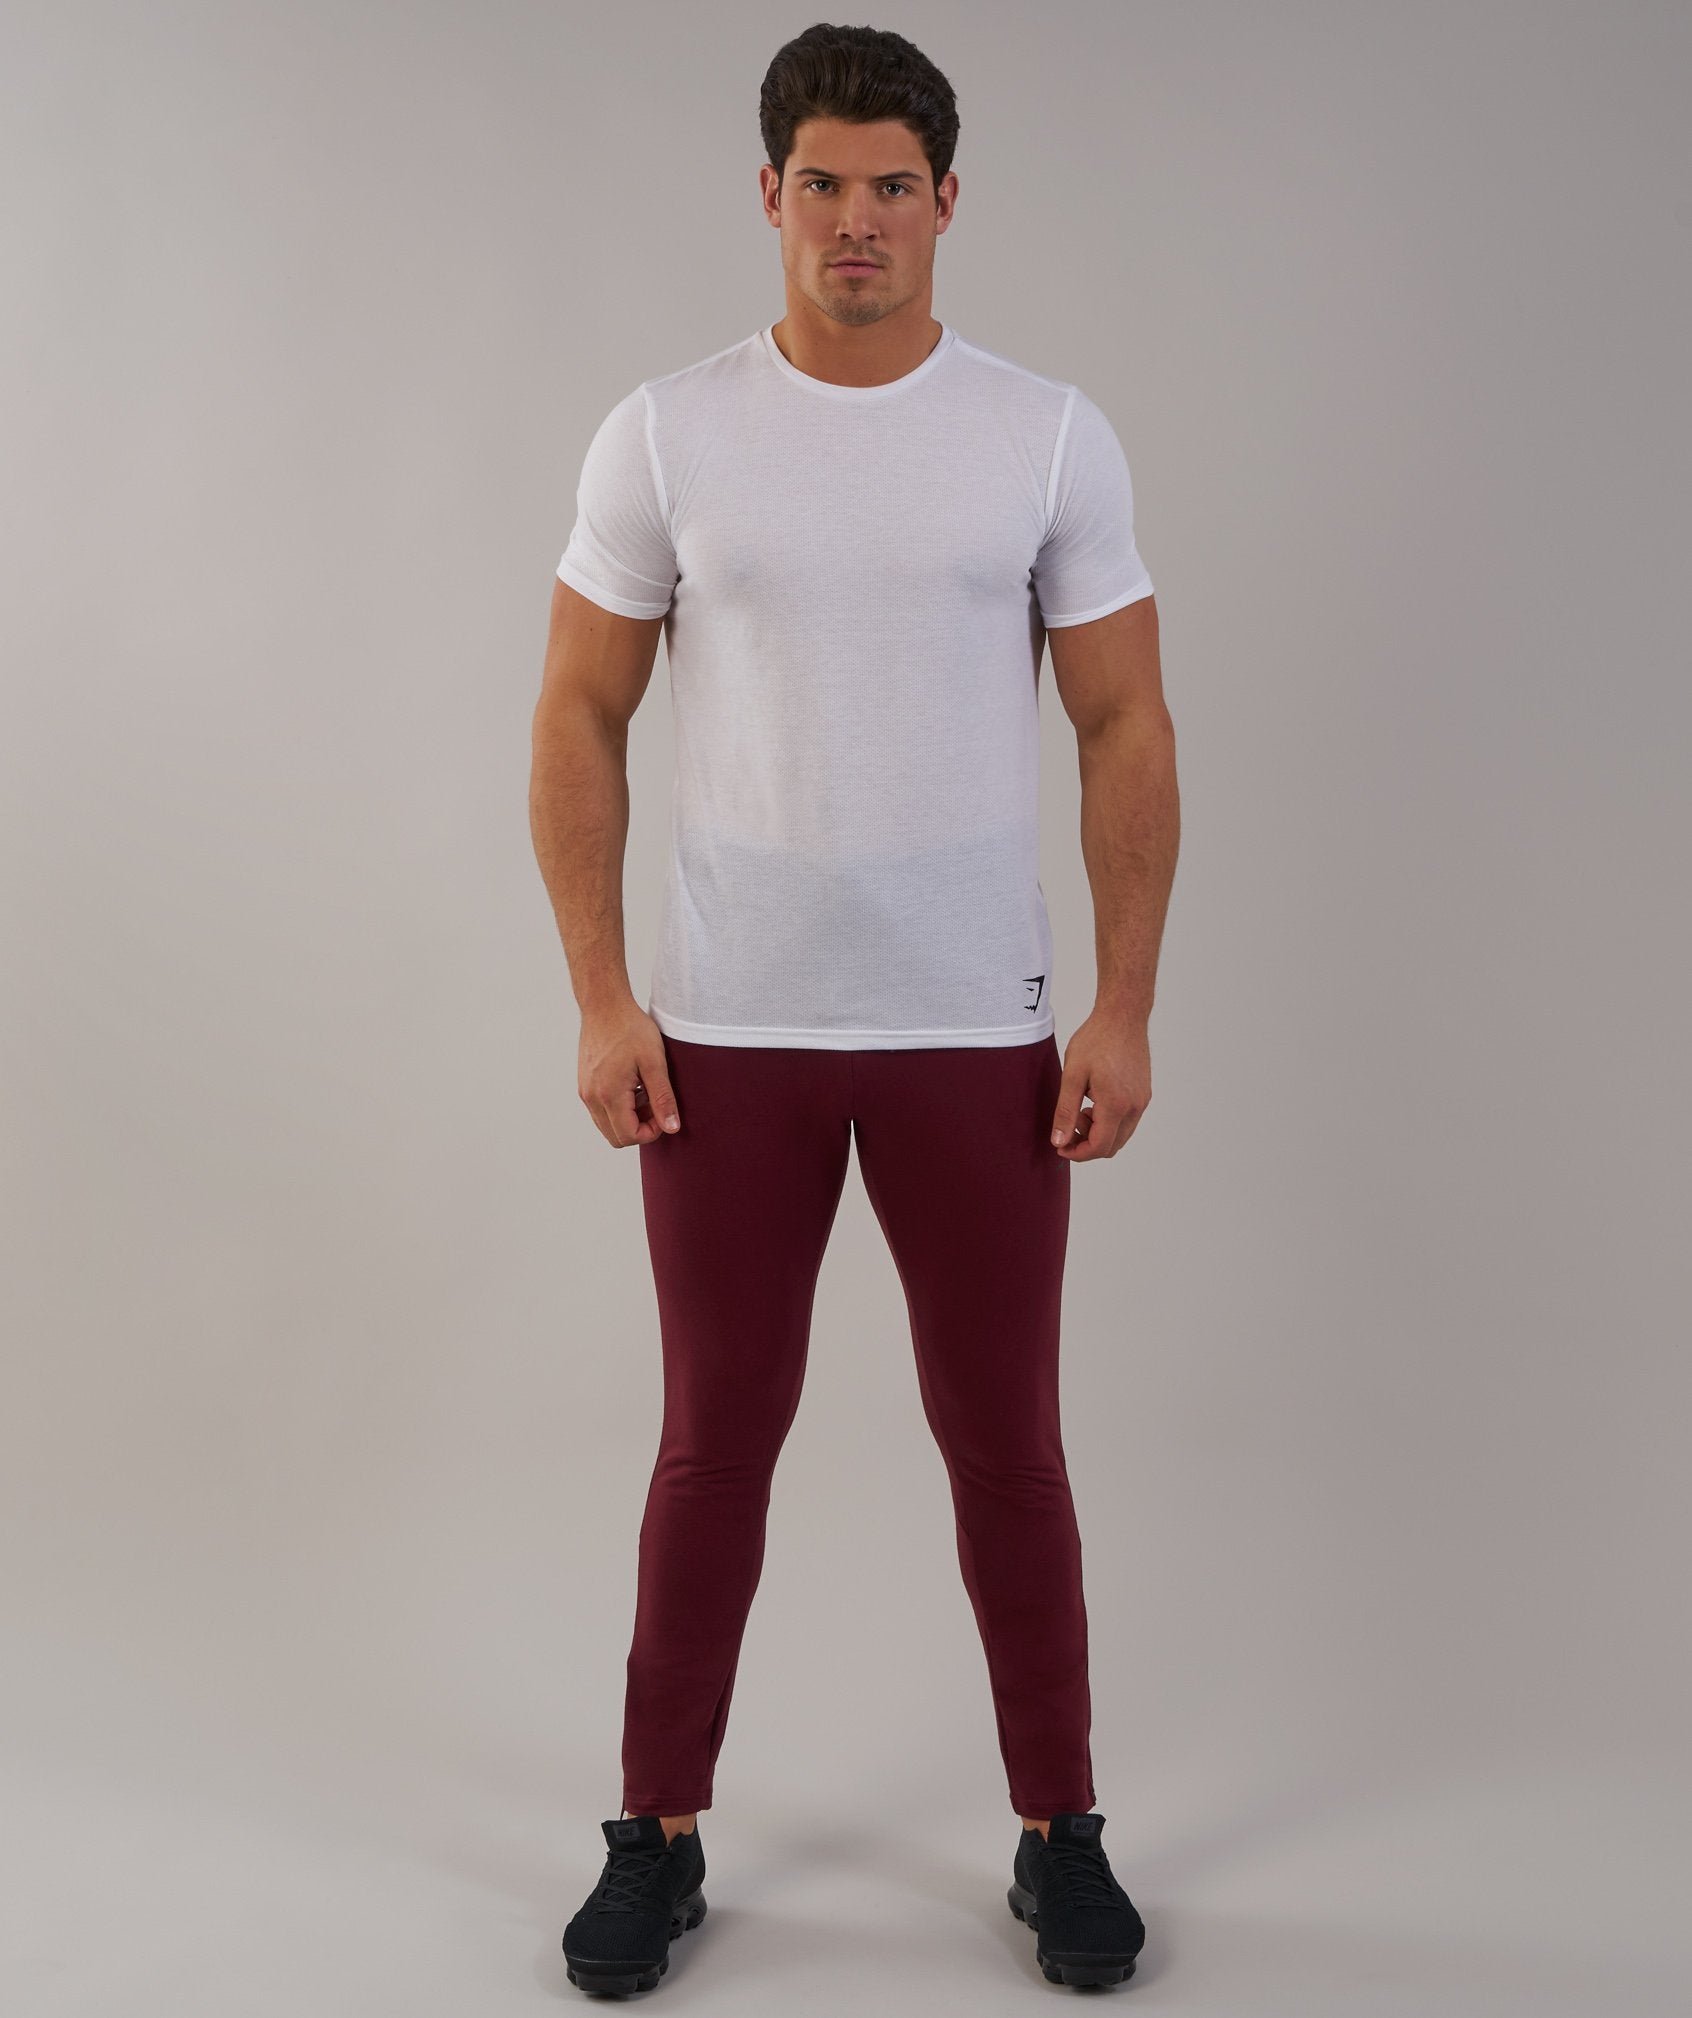 Fit Tapered Bottoms in Port - view 3